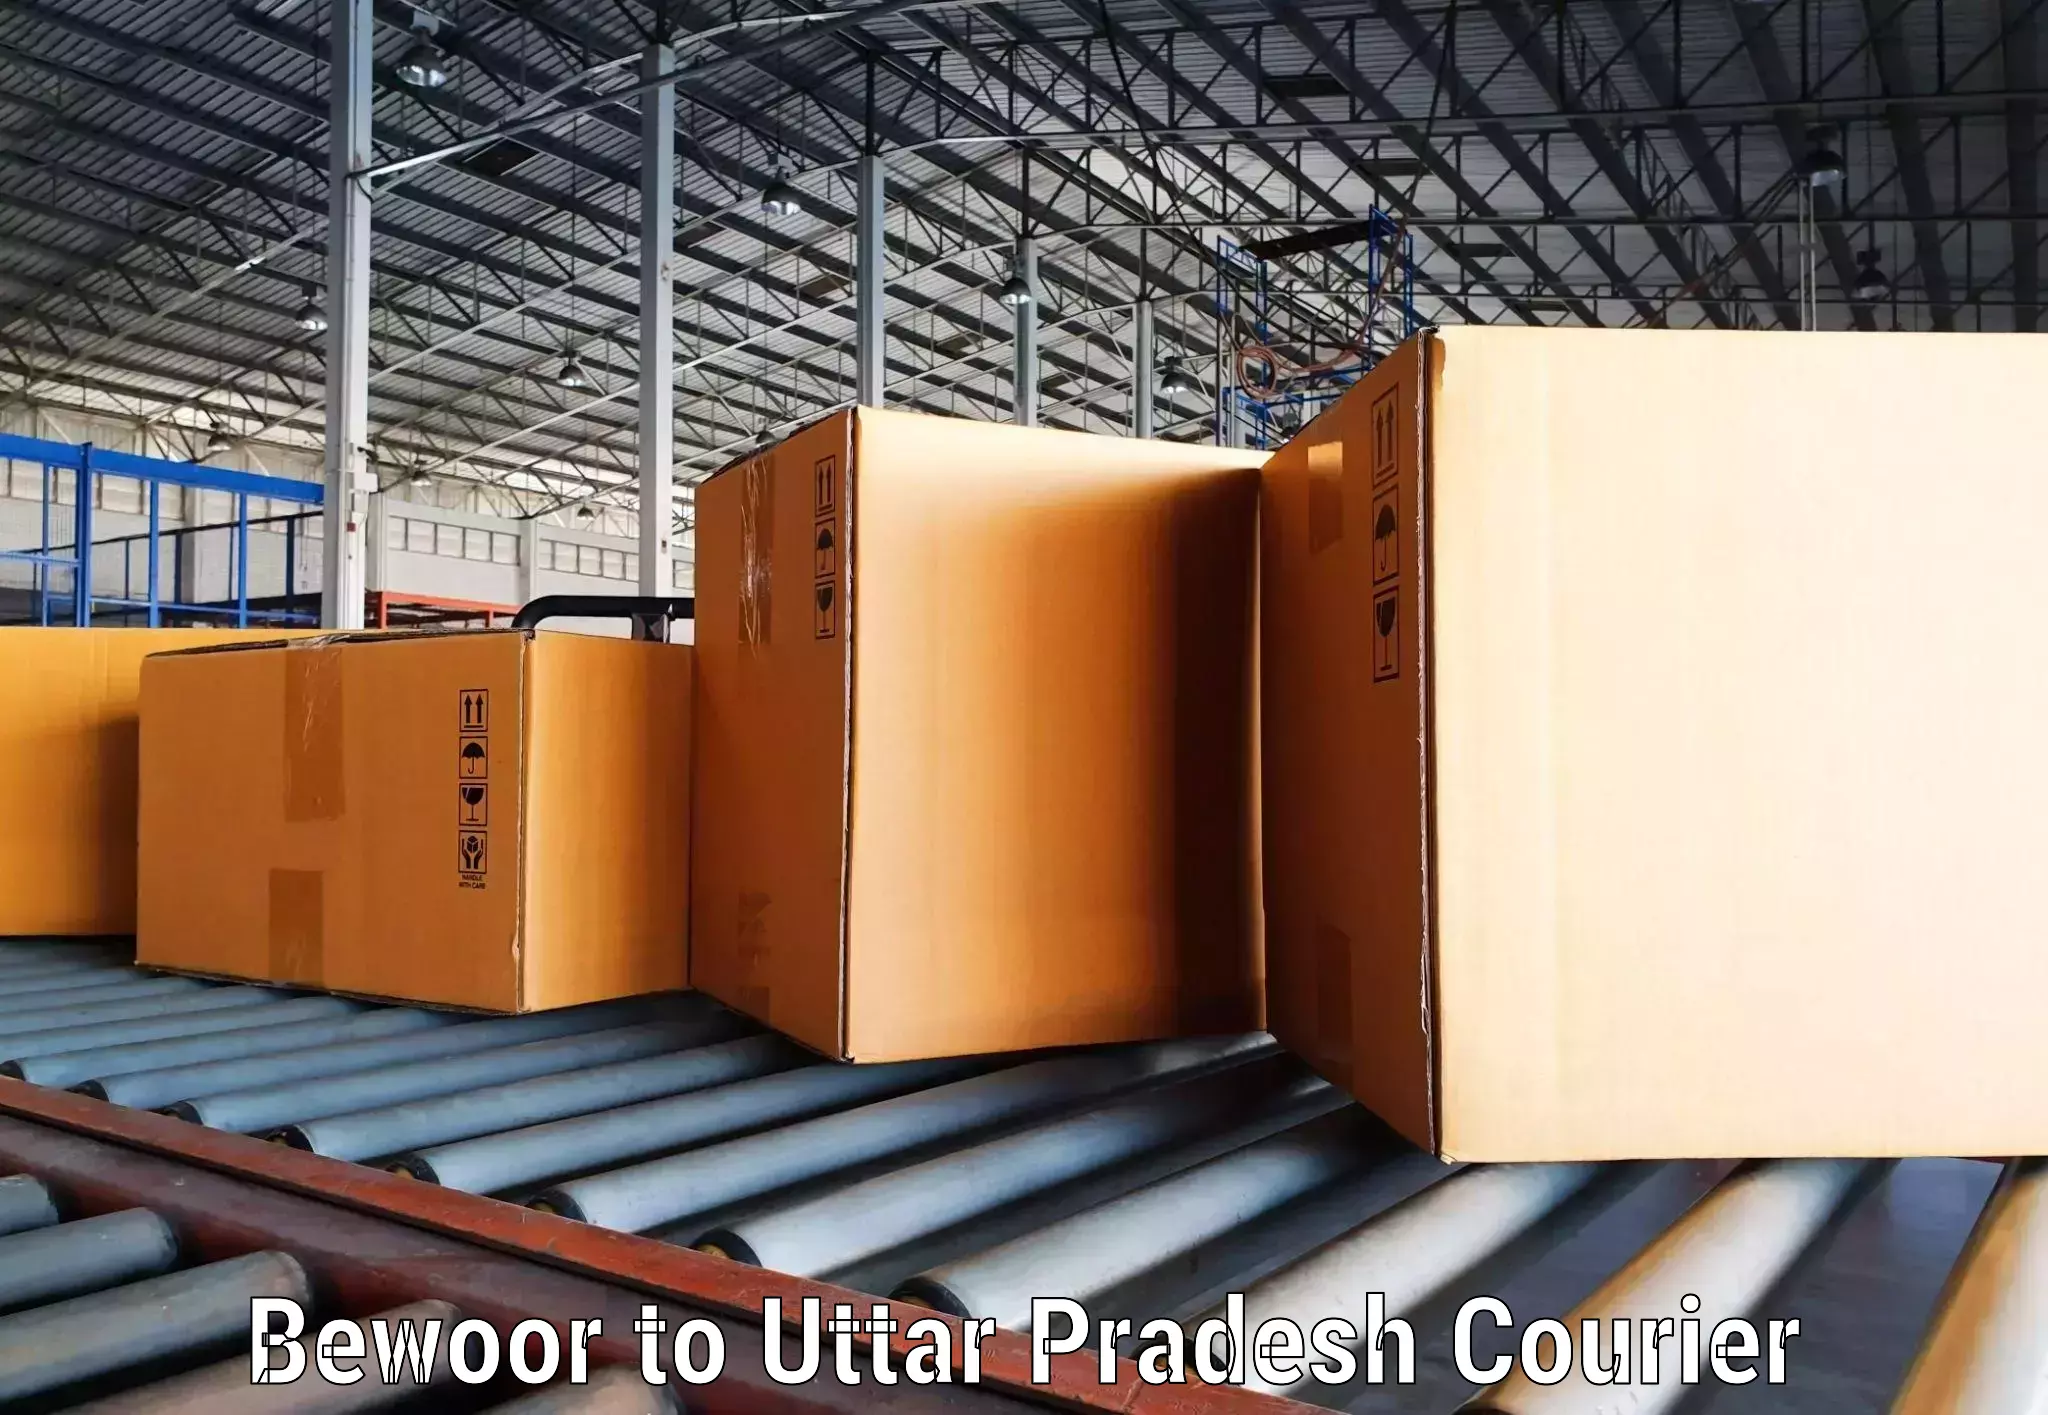 Automated parcel services Bewoor to Moradabad